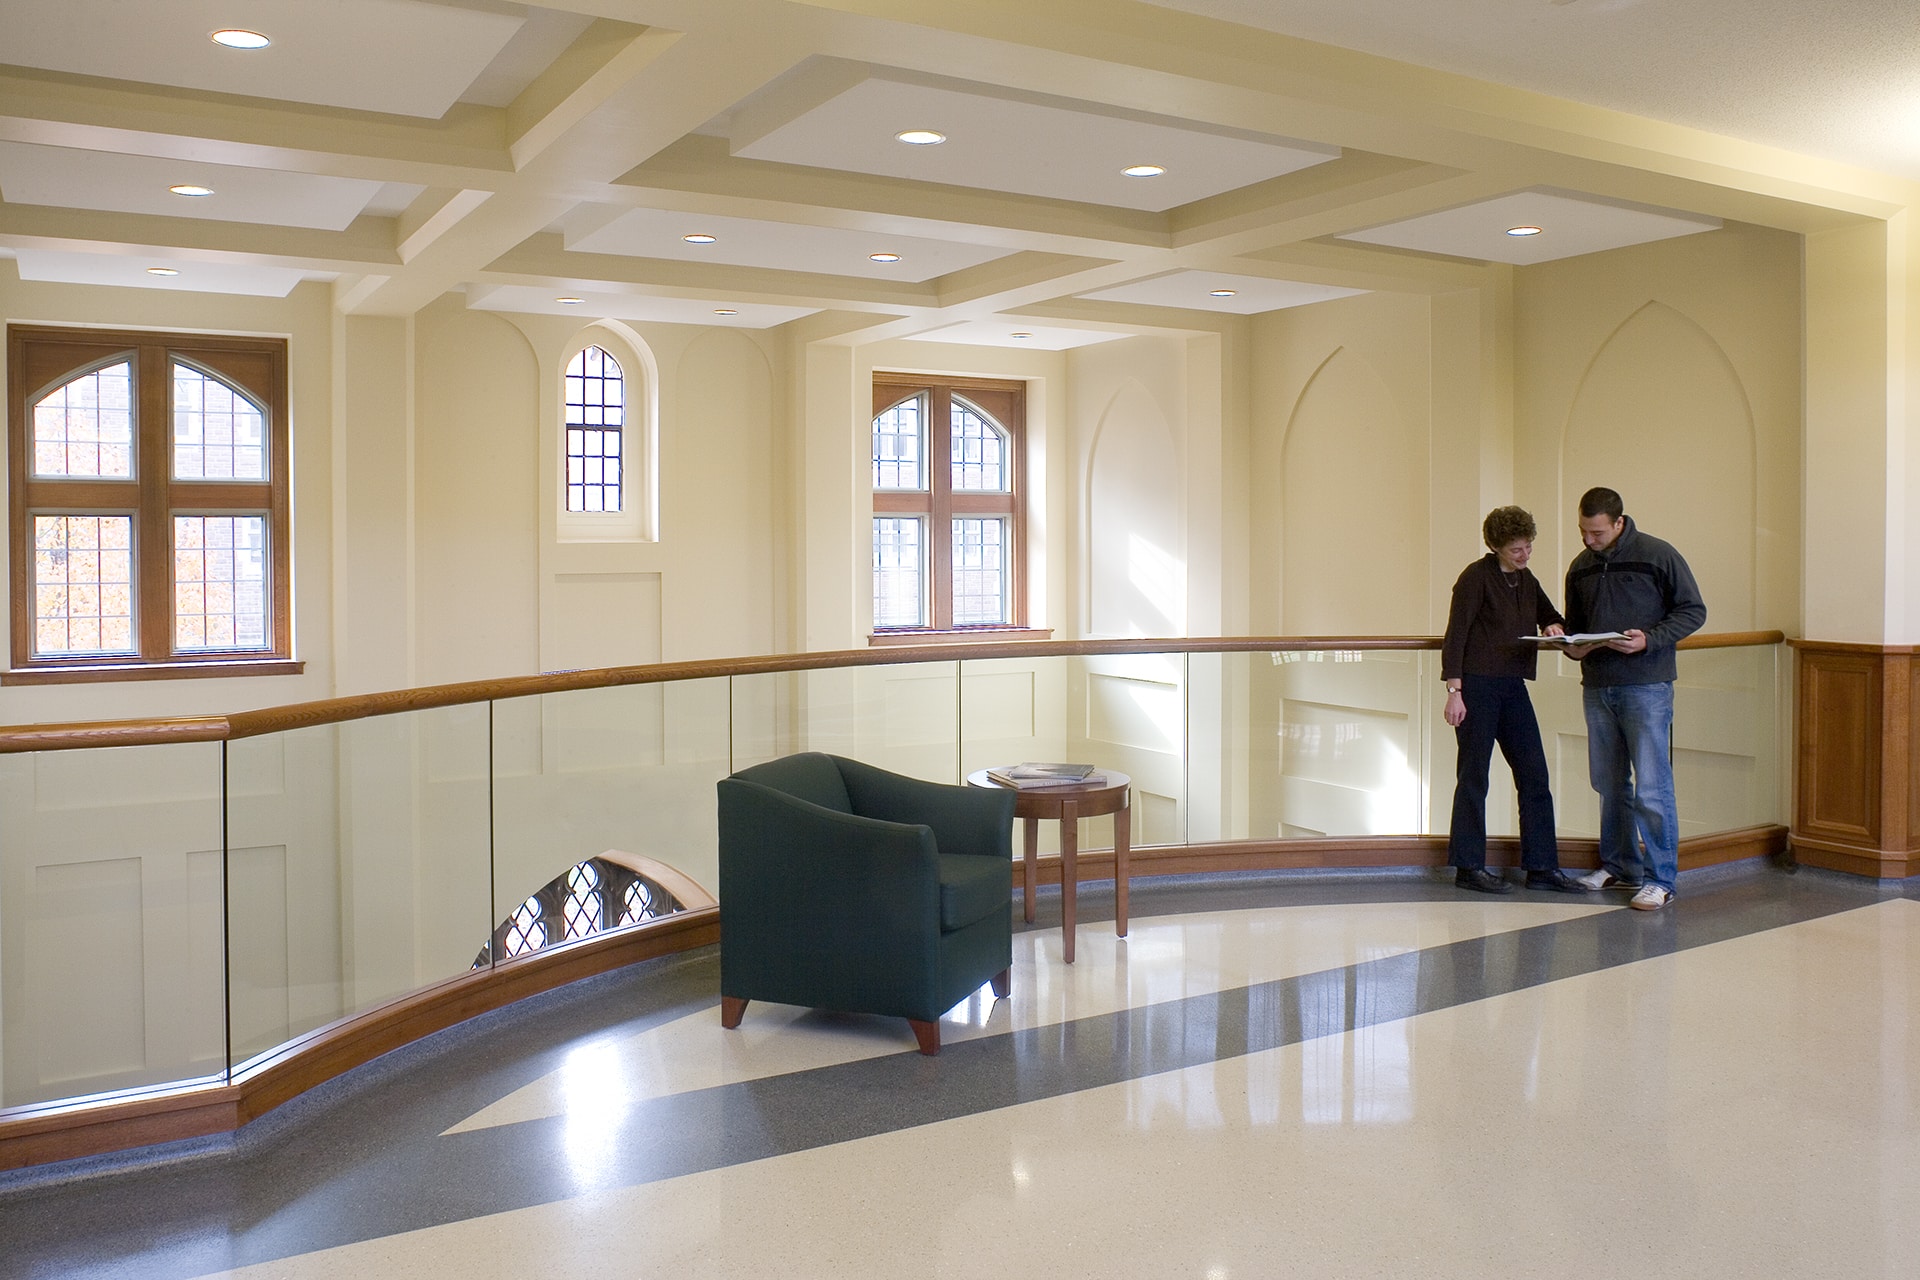 washington university wilson hall interior designed by trivers architectural firm in st. louis